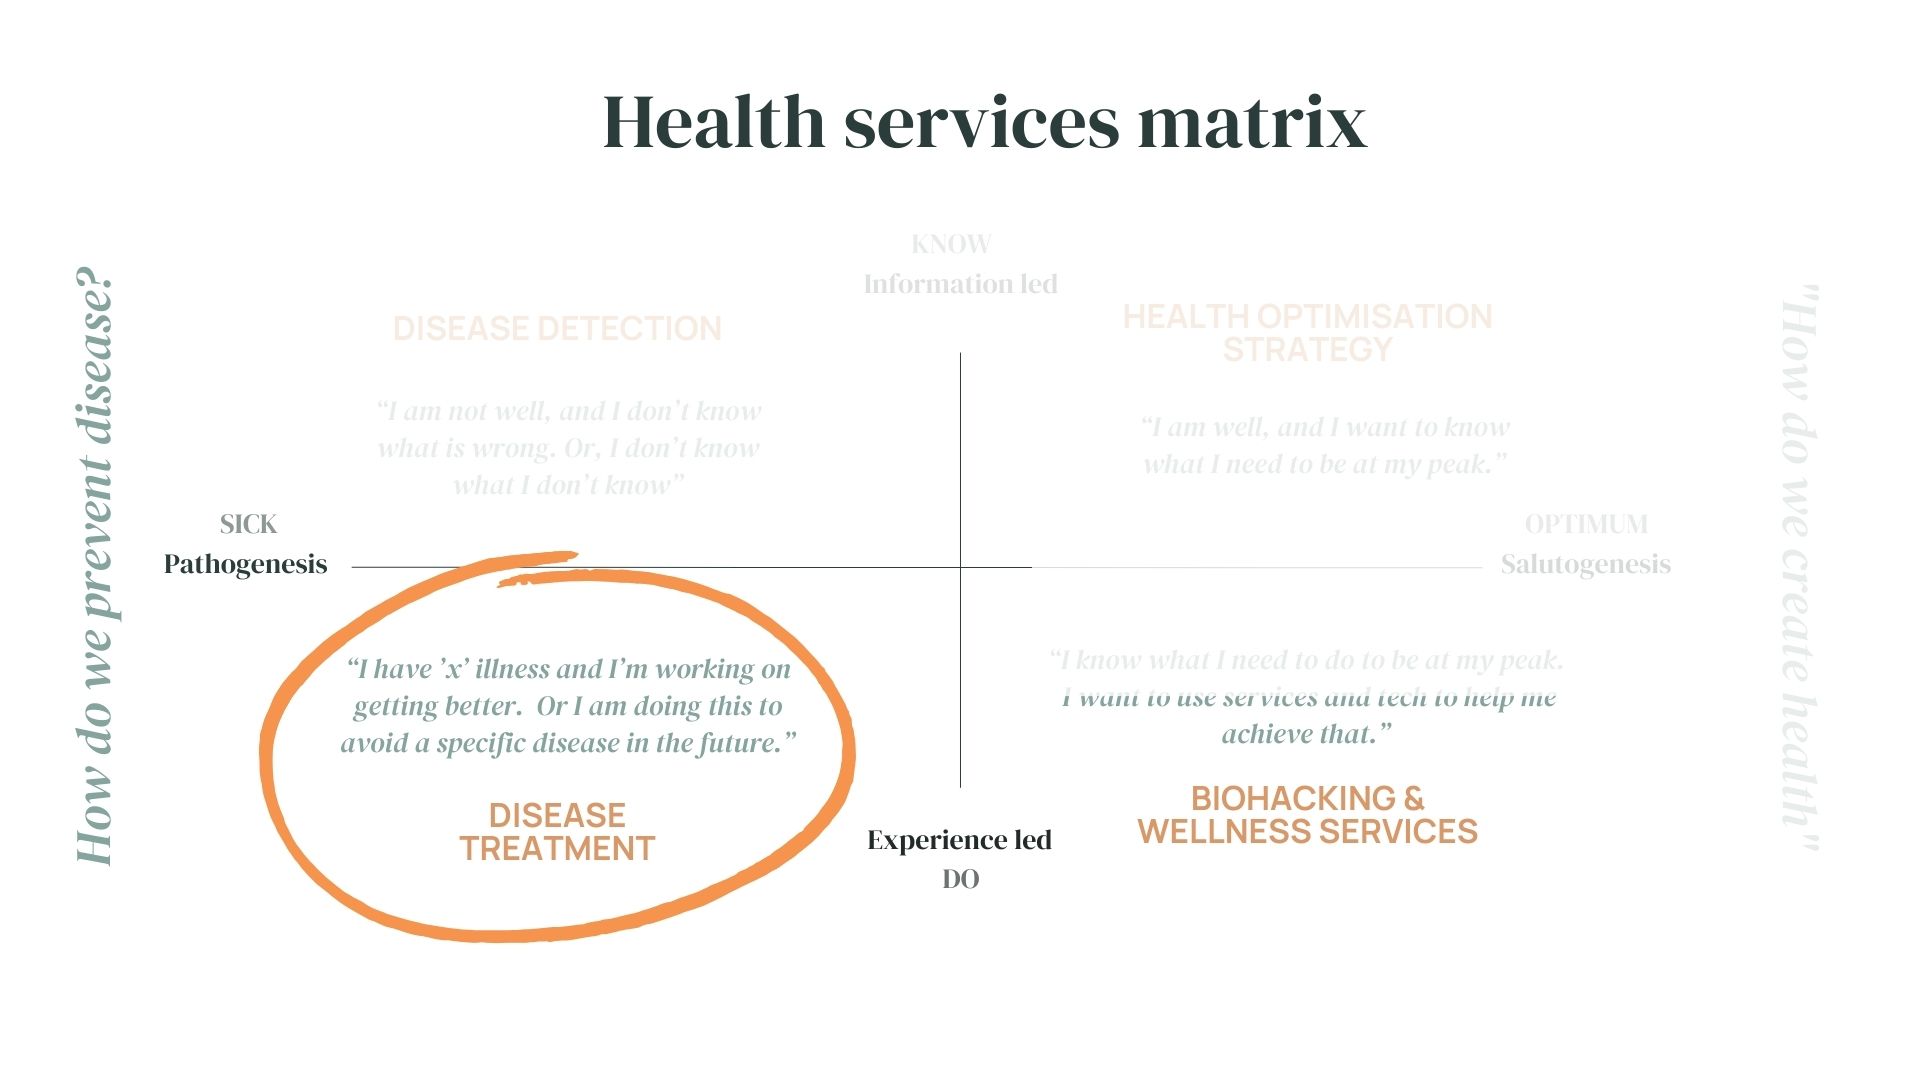 zoomed in section of health services matrix focusing on disease treatment